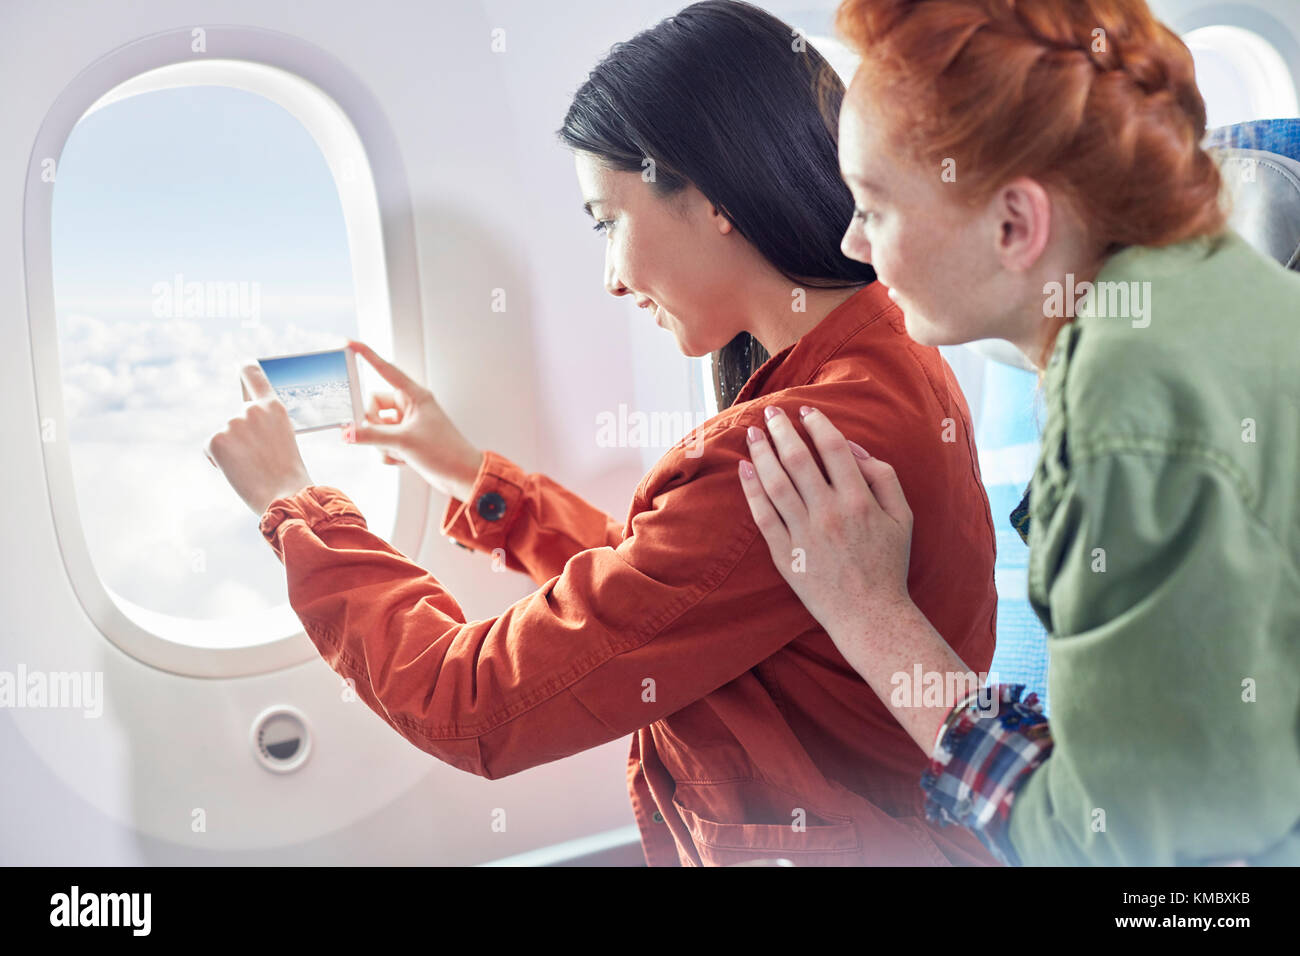 Young women friends using camera phone at airplane window Stock Photo